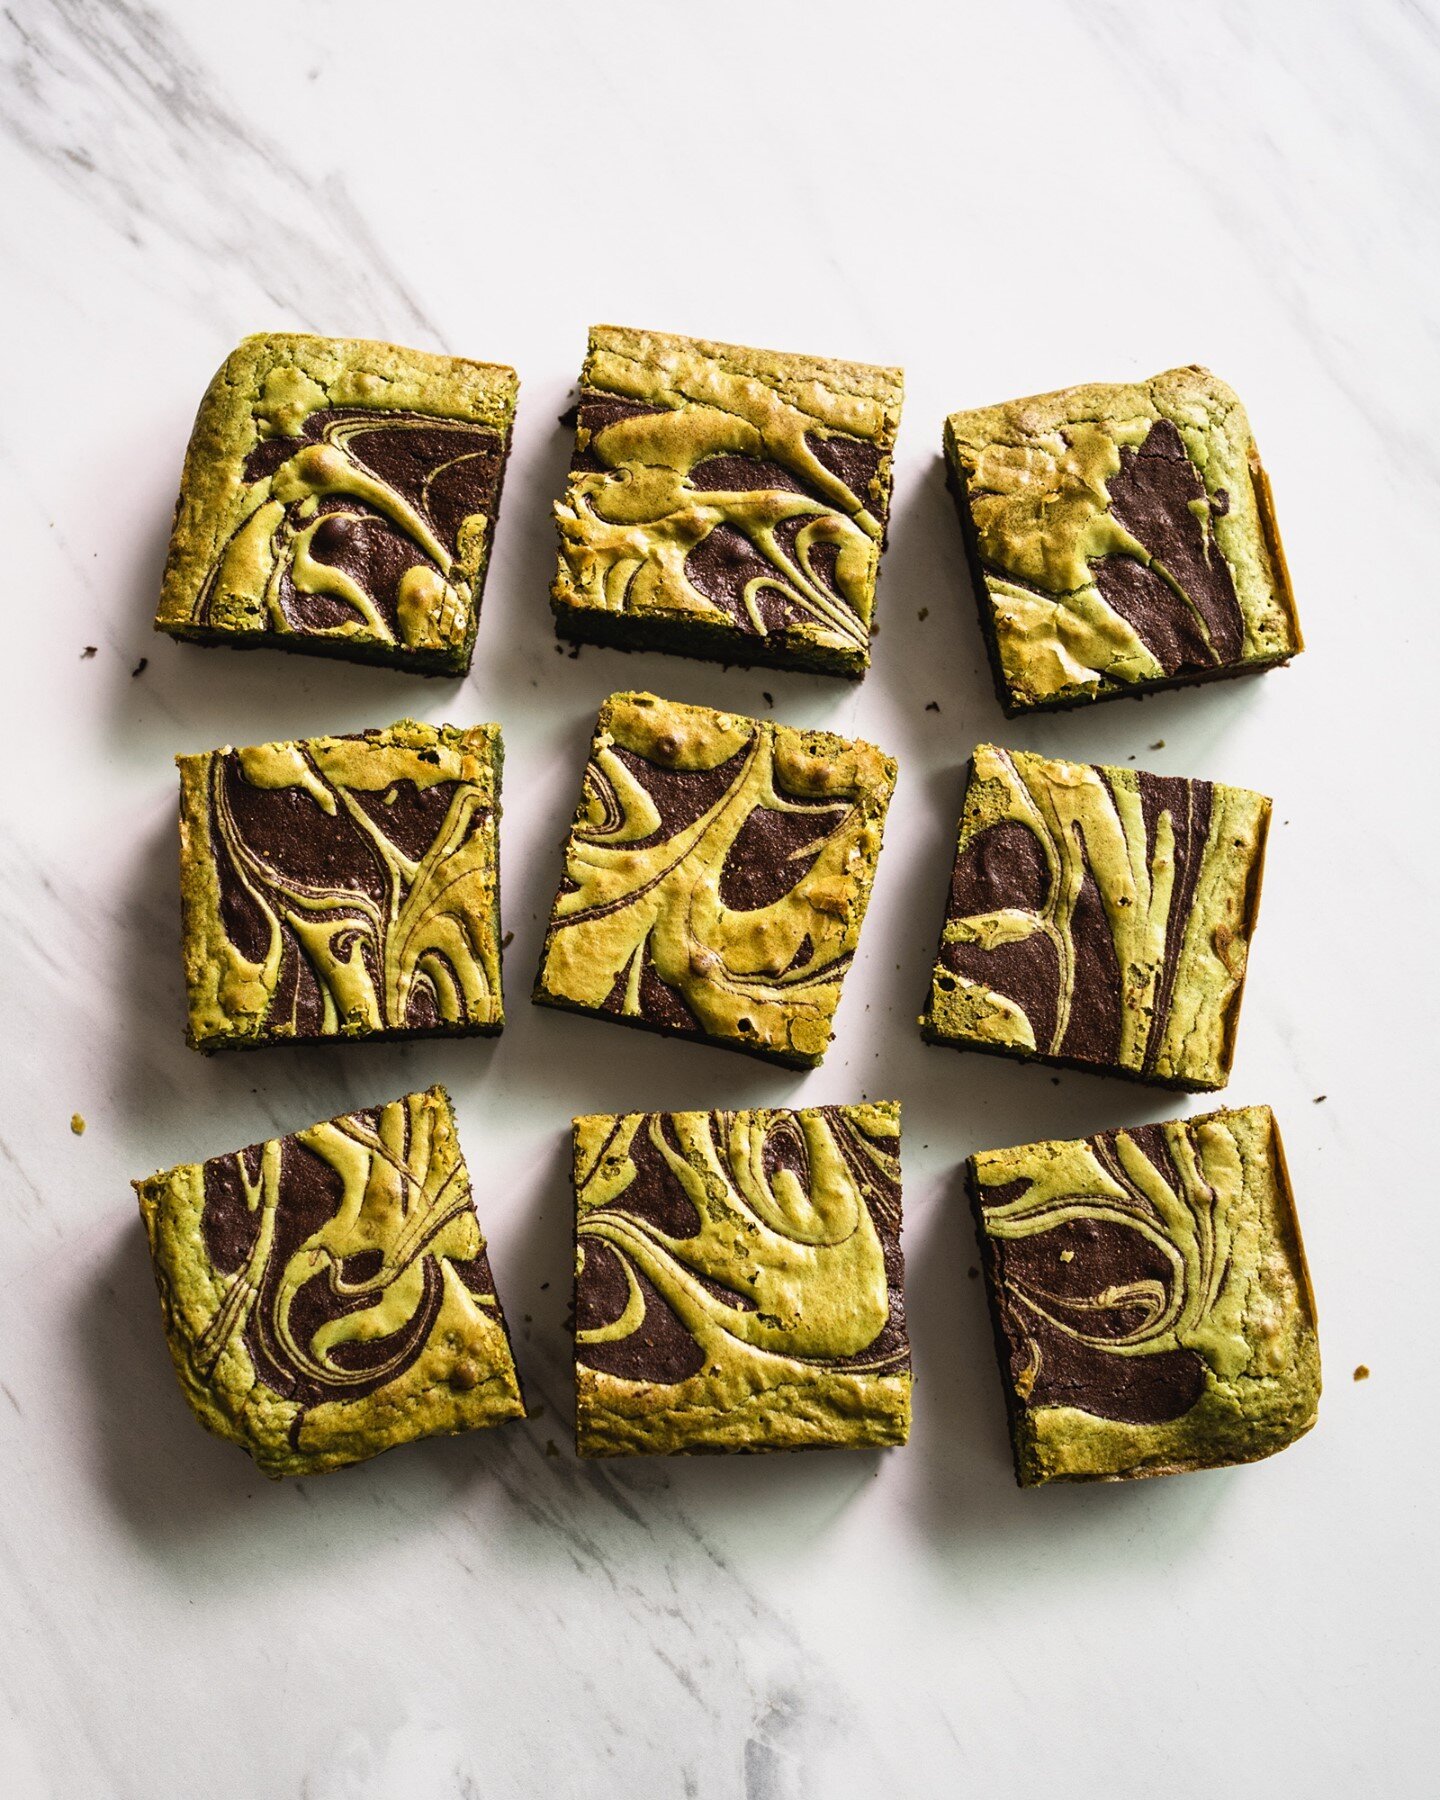 Matcha has definitely been the flavour of the season for me, because out of my last 10 bakes, 4 had matcha in it 😅, including these swirly matcha brownies, which I'm still kinda obsessed about. 💚🤎💚
 
If you're curious, the recipe for these gorgeo